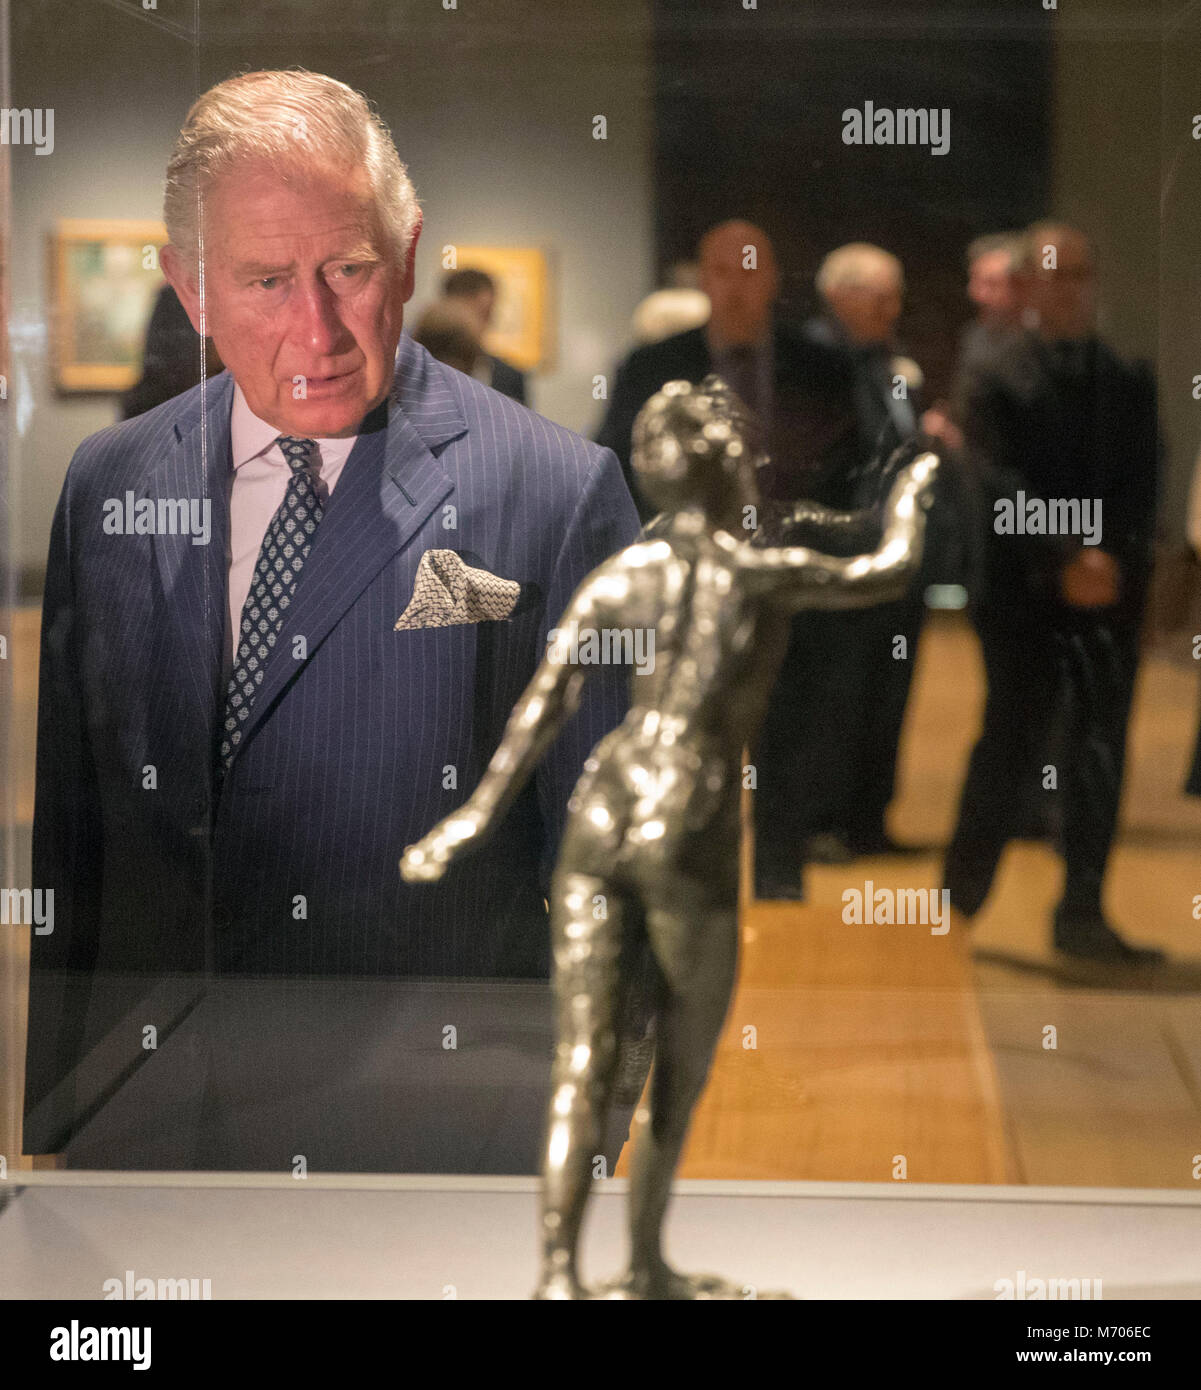 The Prince of Wales, patron of the National Gallery, views an ...